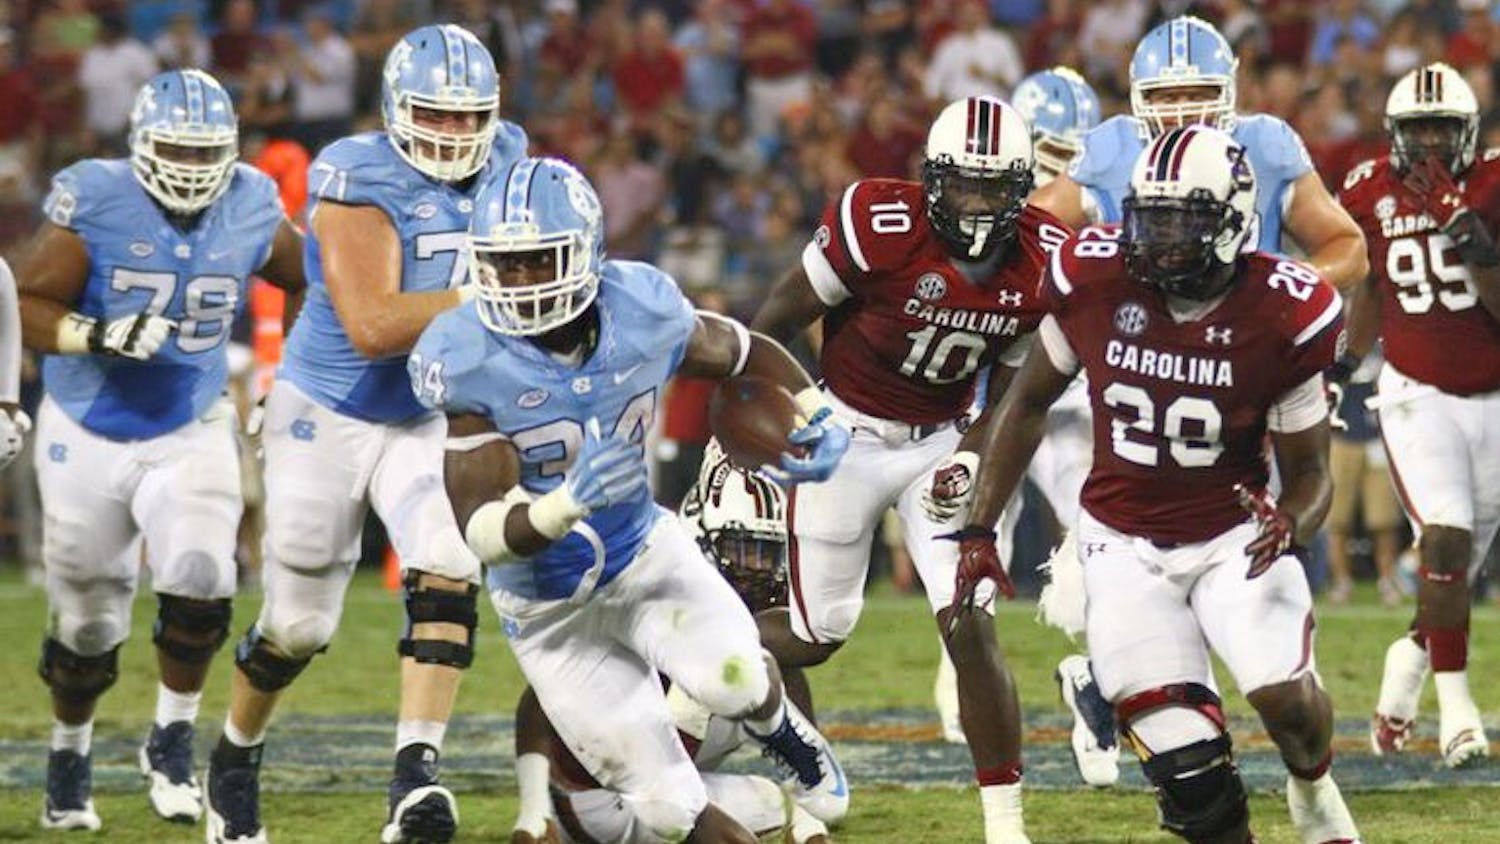 Elijah Hood (34) carries the ball during UNC’s game against USC in Charlotte.